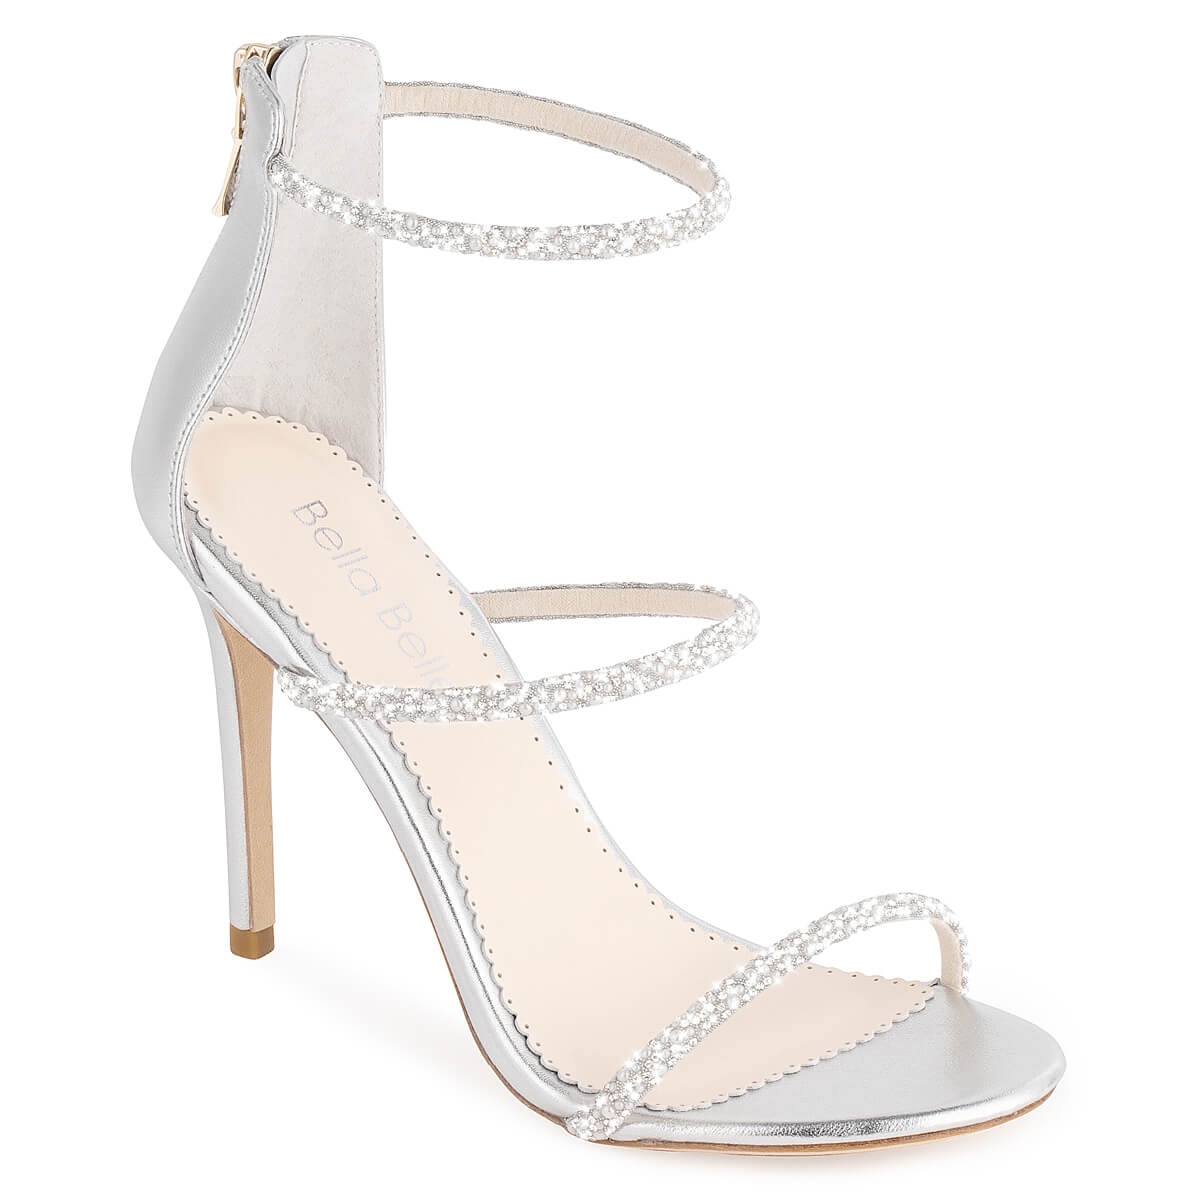 4-Inch Silver Strappy Heels with Pearls | Bella Belle